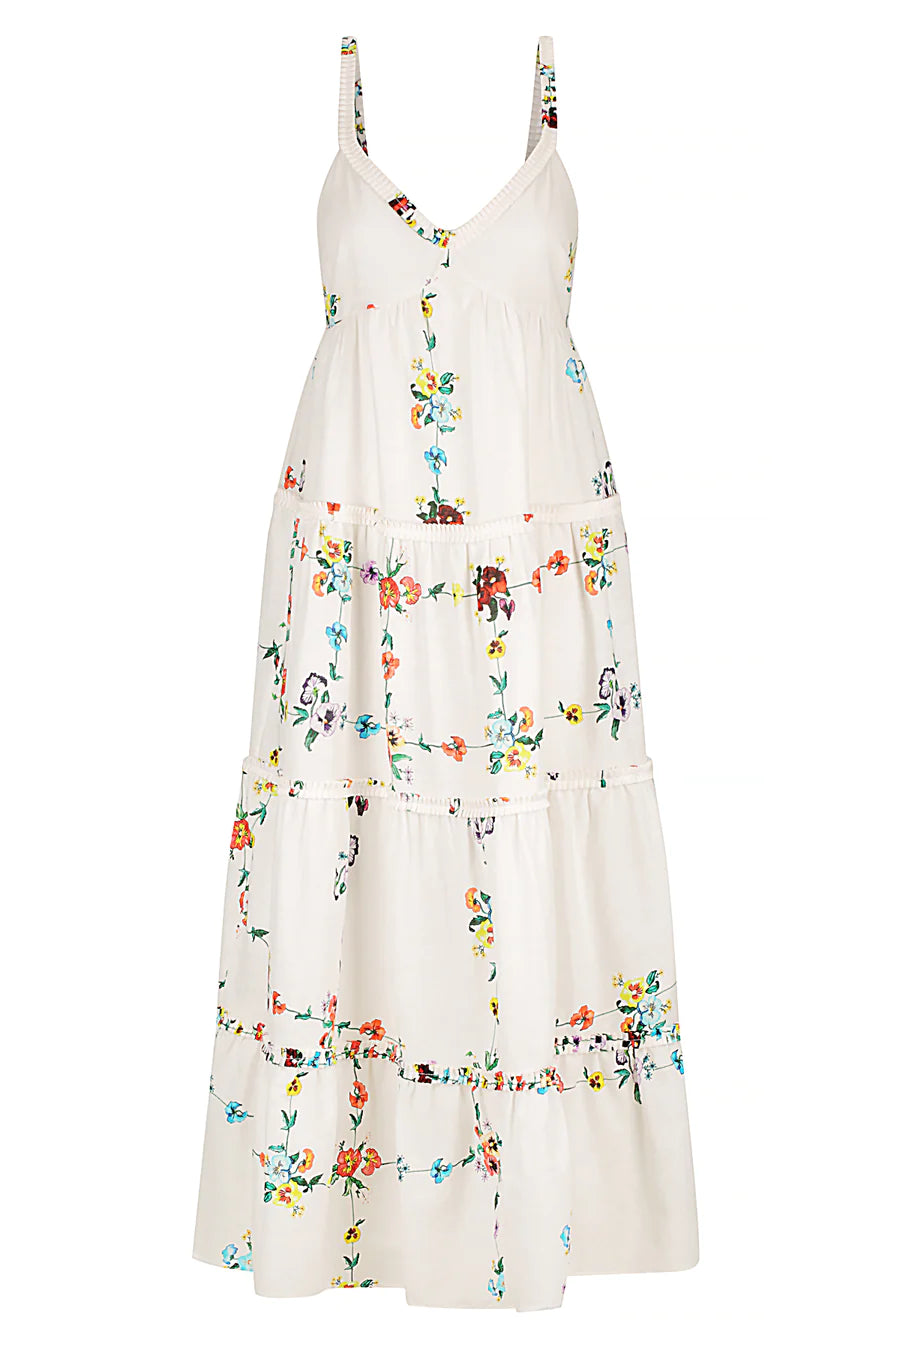 Linen and cotton blend white summer dress with colourful grid floral print with ruffle detail throughout triple layered skirt and thing straps with sweetheart neckline